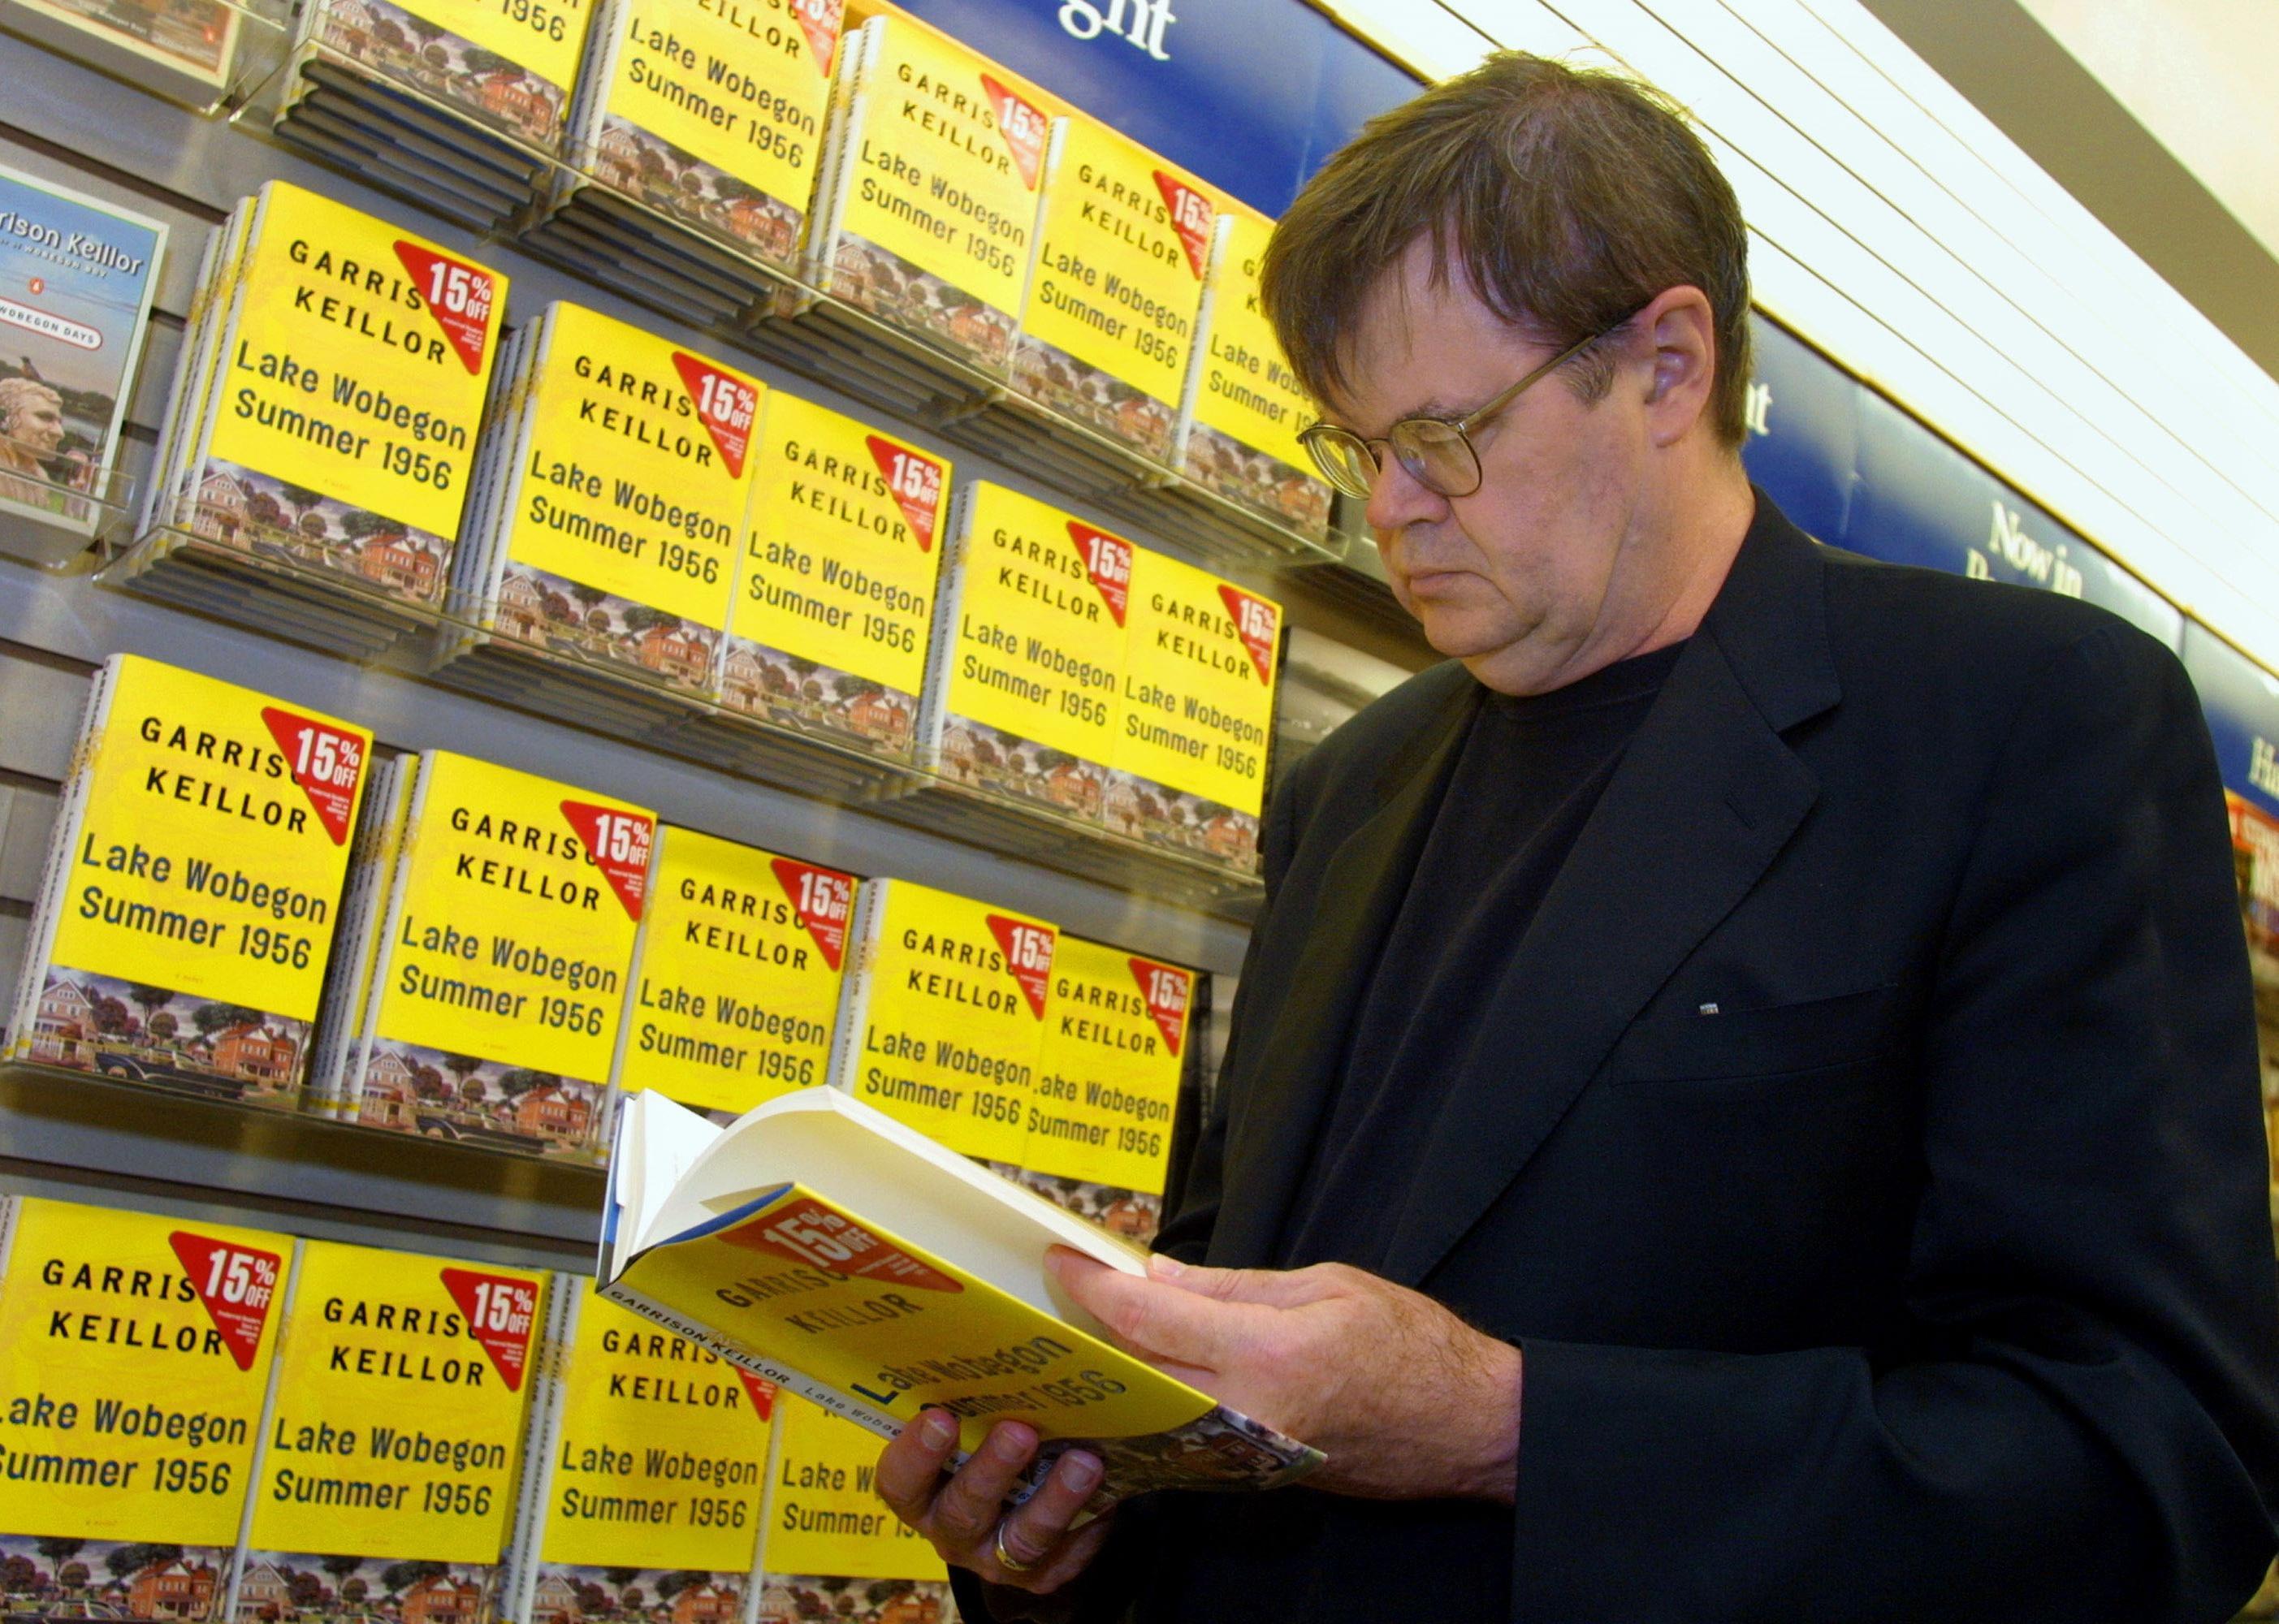 Garrison Keillor holding a copy of his book at Waldenbooks.